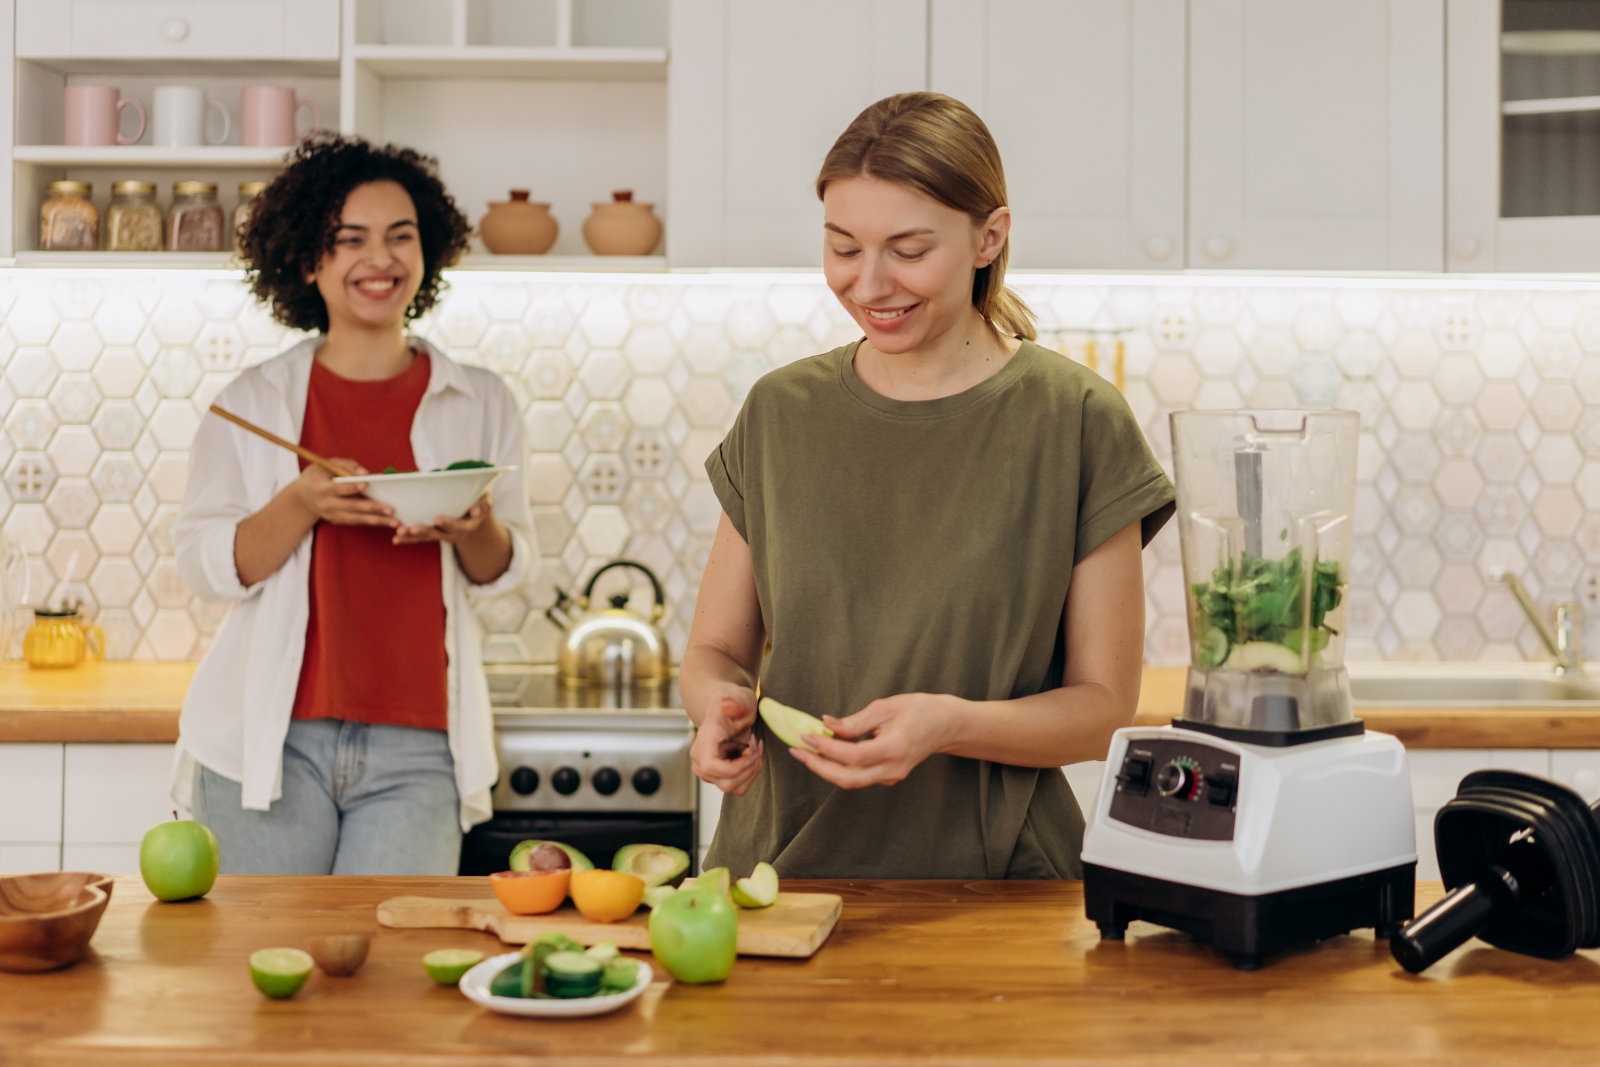 Self-care activities like cooking with friends